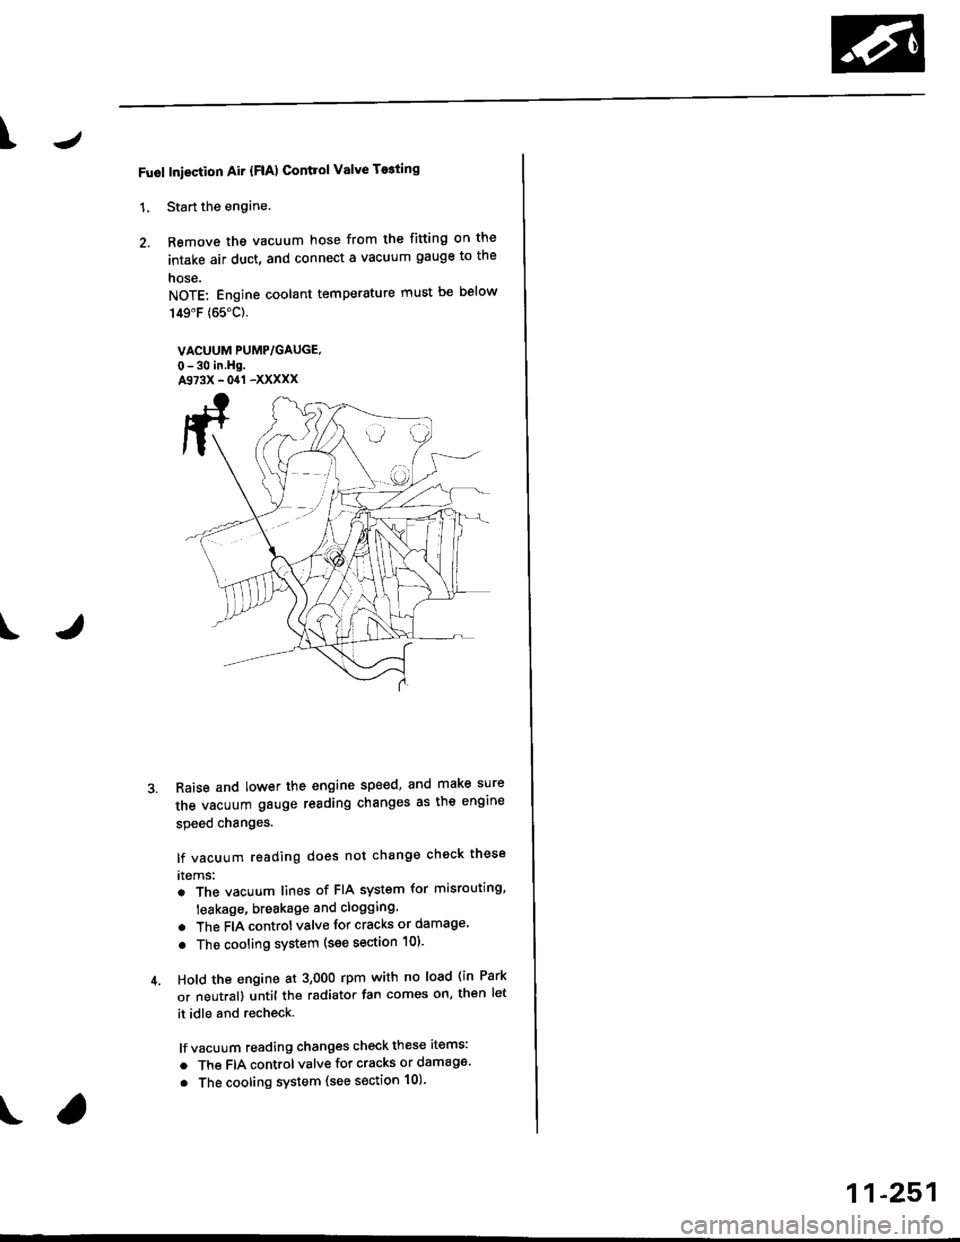 HONDA CIVIC 1996 6.G Service Manual \J
Fuol Iniection Air {FlA) Contlol Valve T$ting
1. Start the engine.
2. Remove the vacuum hose from the fitting on the
intake air duct, and connect a vacuum gauge to the
nose.
NOTE: Engine coolant te